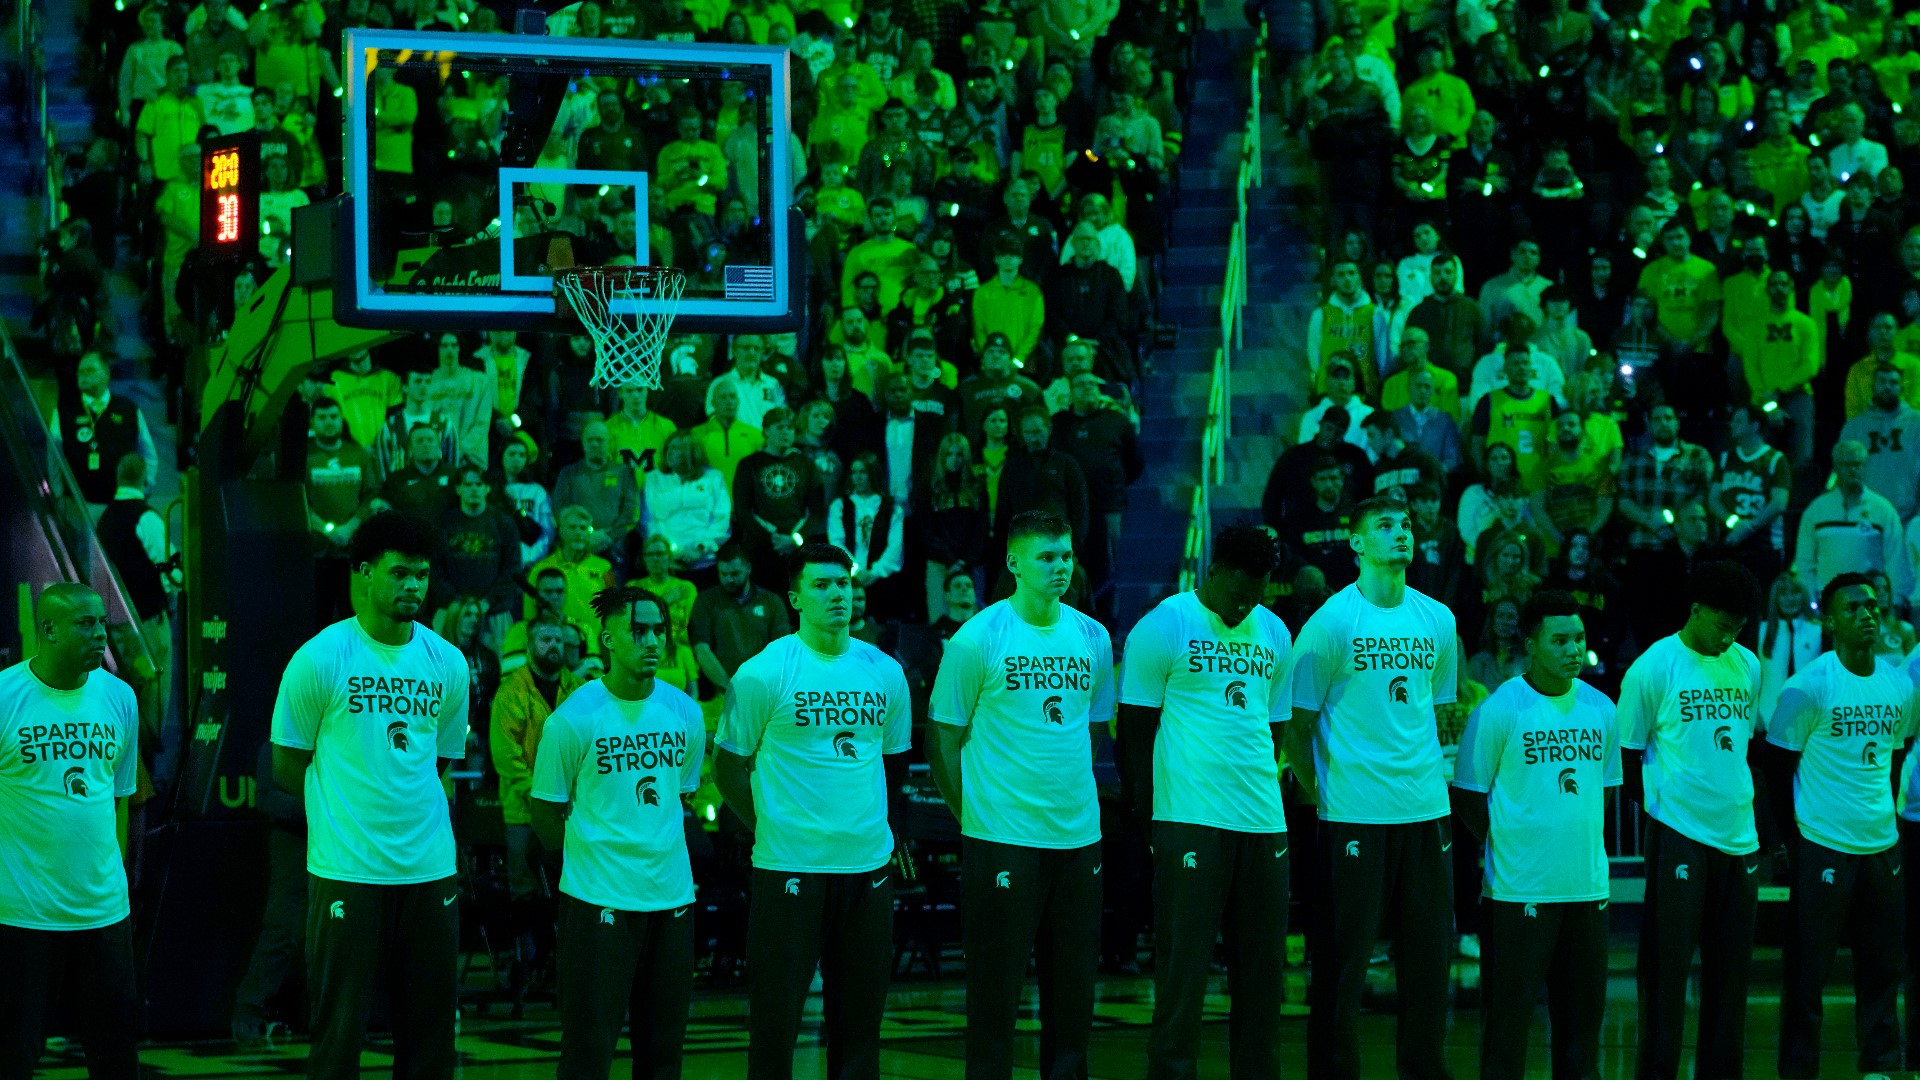 Michigan showed its support for rival Michigan State with a poignant pregame ceremony before the Wolverines took an 84-72 win on Saturday night.